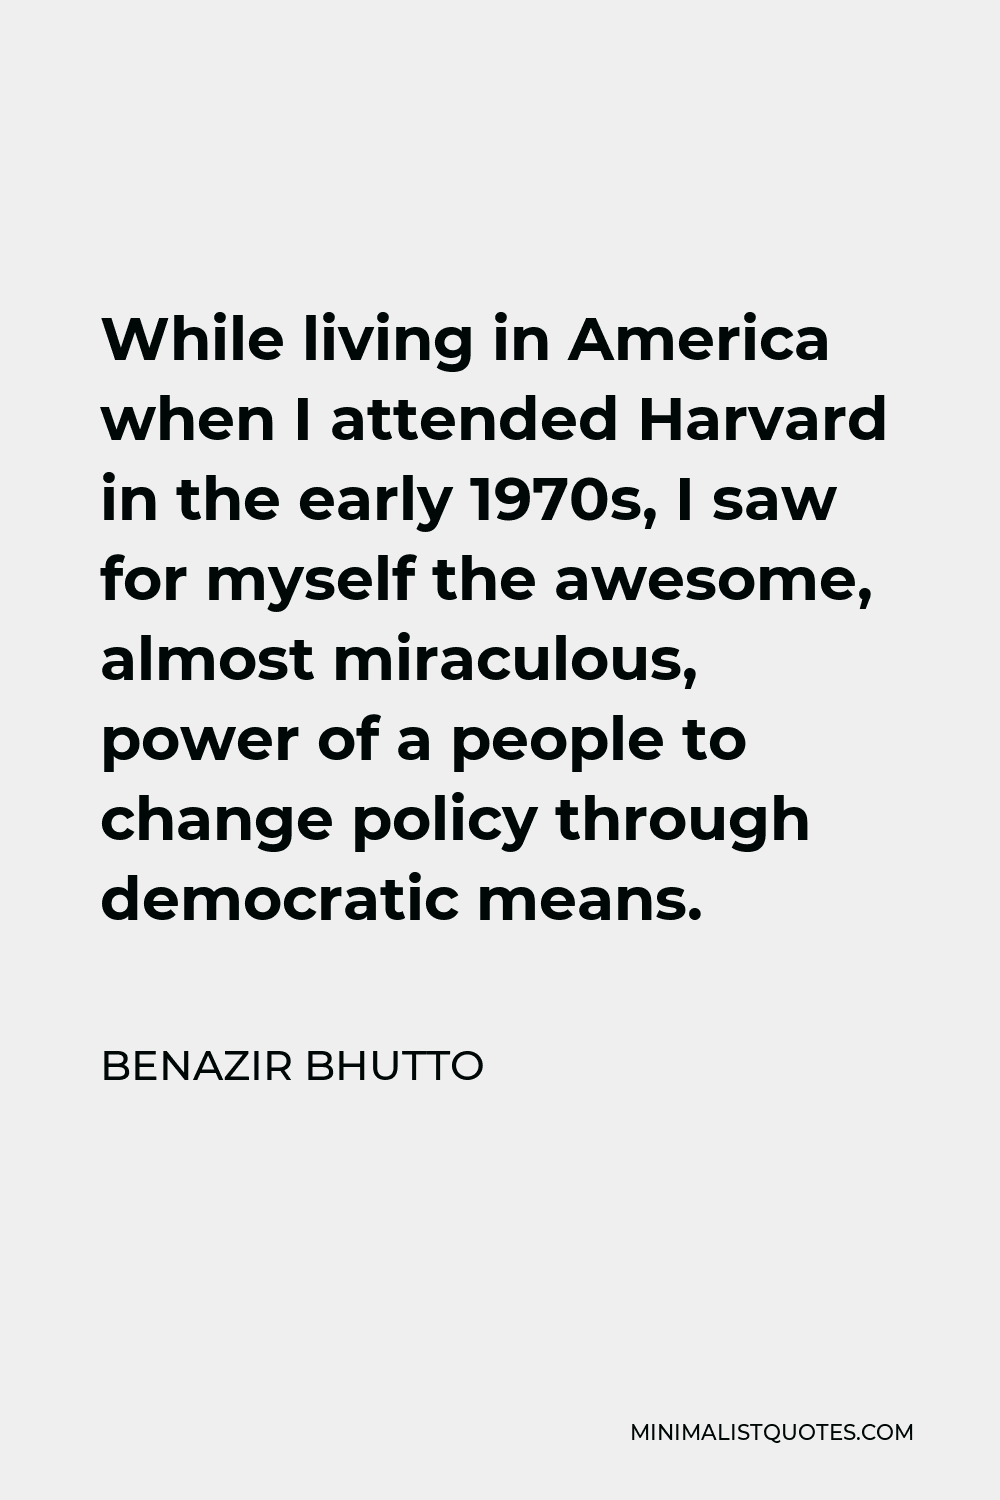 Benazir Bhutto Quote - While living in America when I attended Harvard in the early 1970s, I saw for myself the awesome, almost miraculous, power of a people to change policy through democratic means.